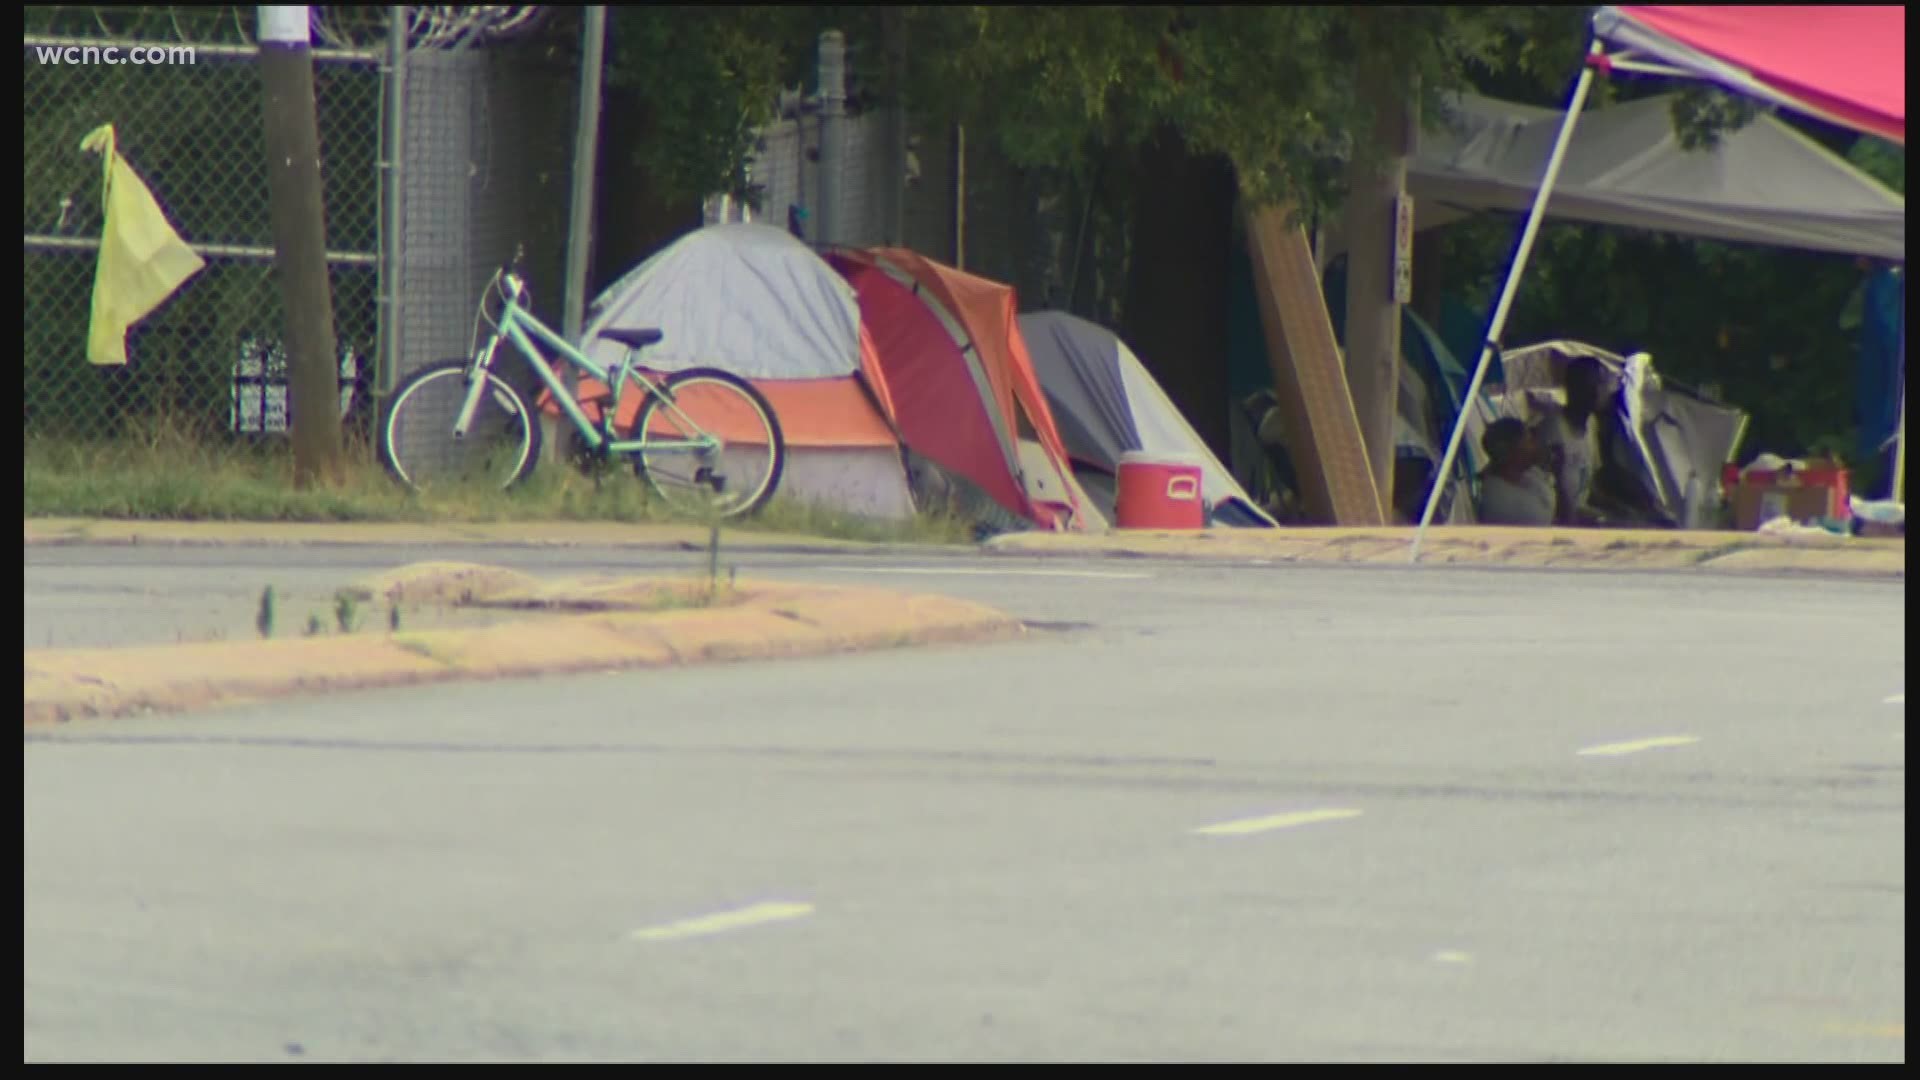 The property owner's attorney says the lawsuit was their last resort. Advocates say people living in Tent City aren't having their needs heard.